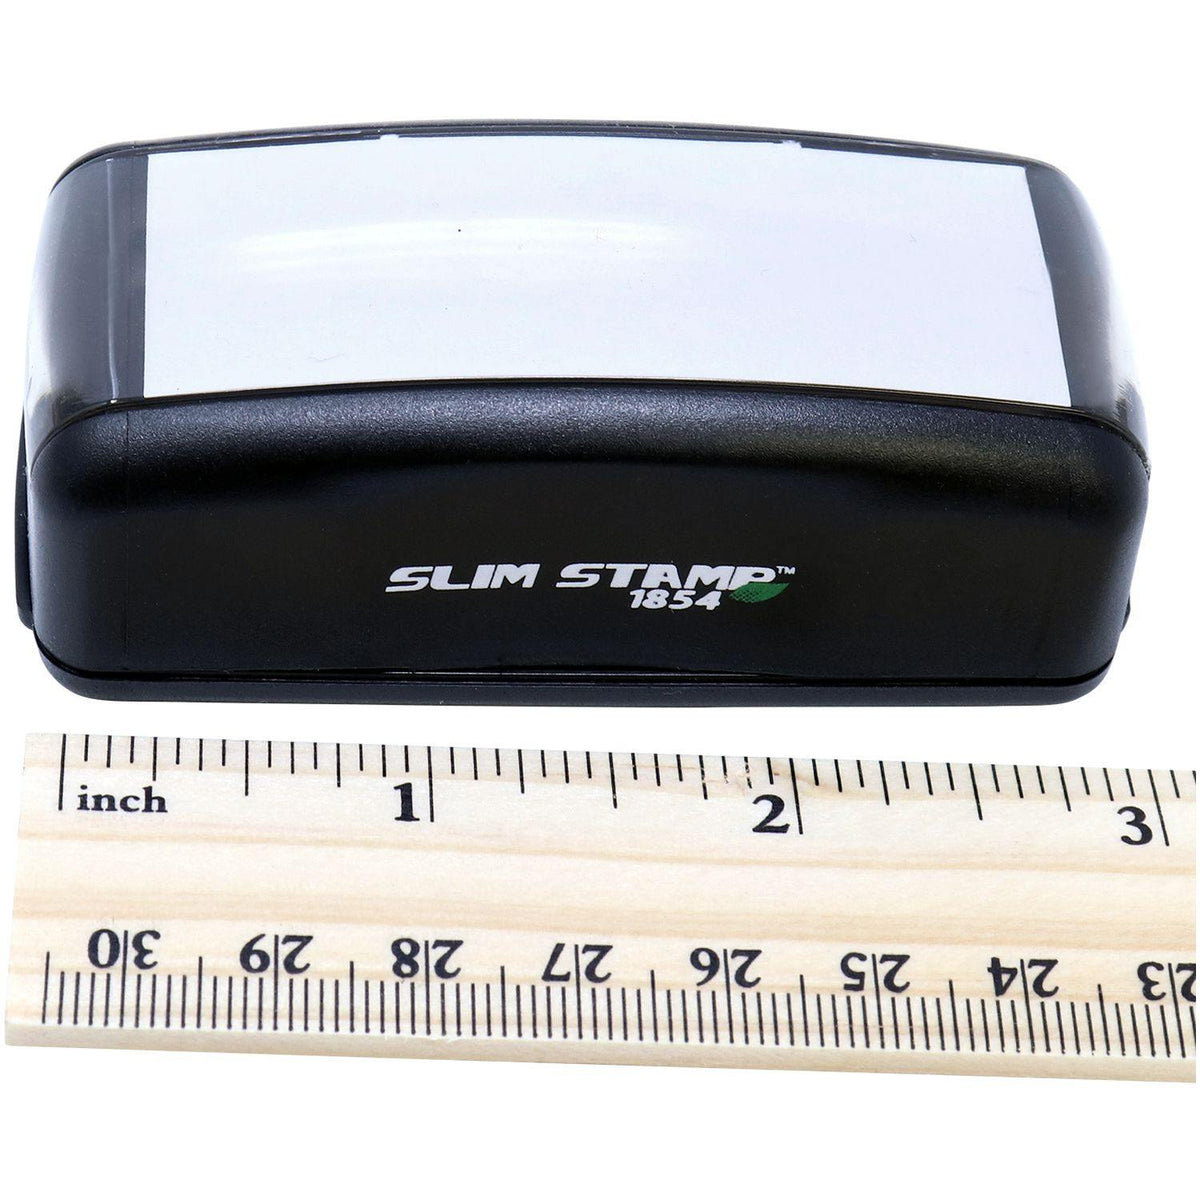 Measurement Large Pre Inked Installment Loan Stamp with Ruler